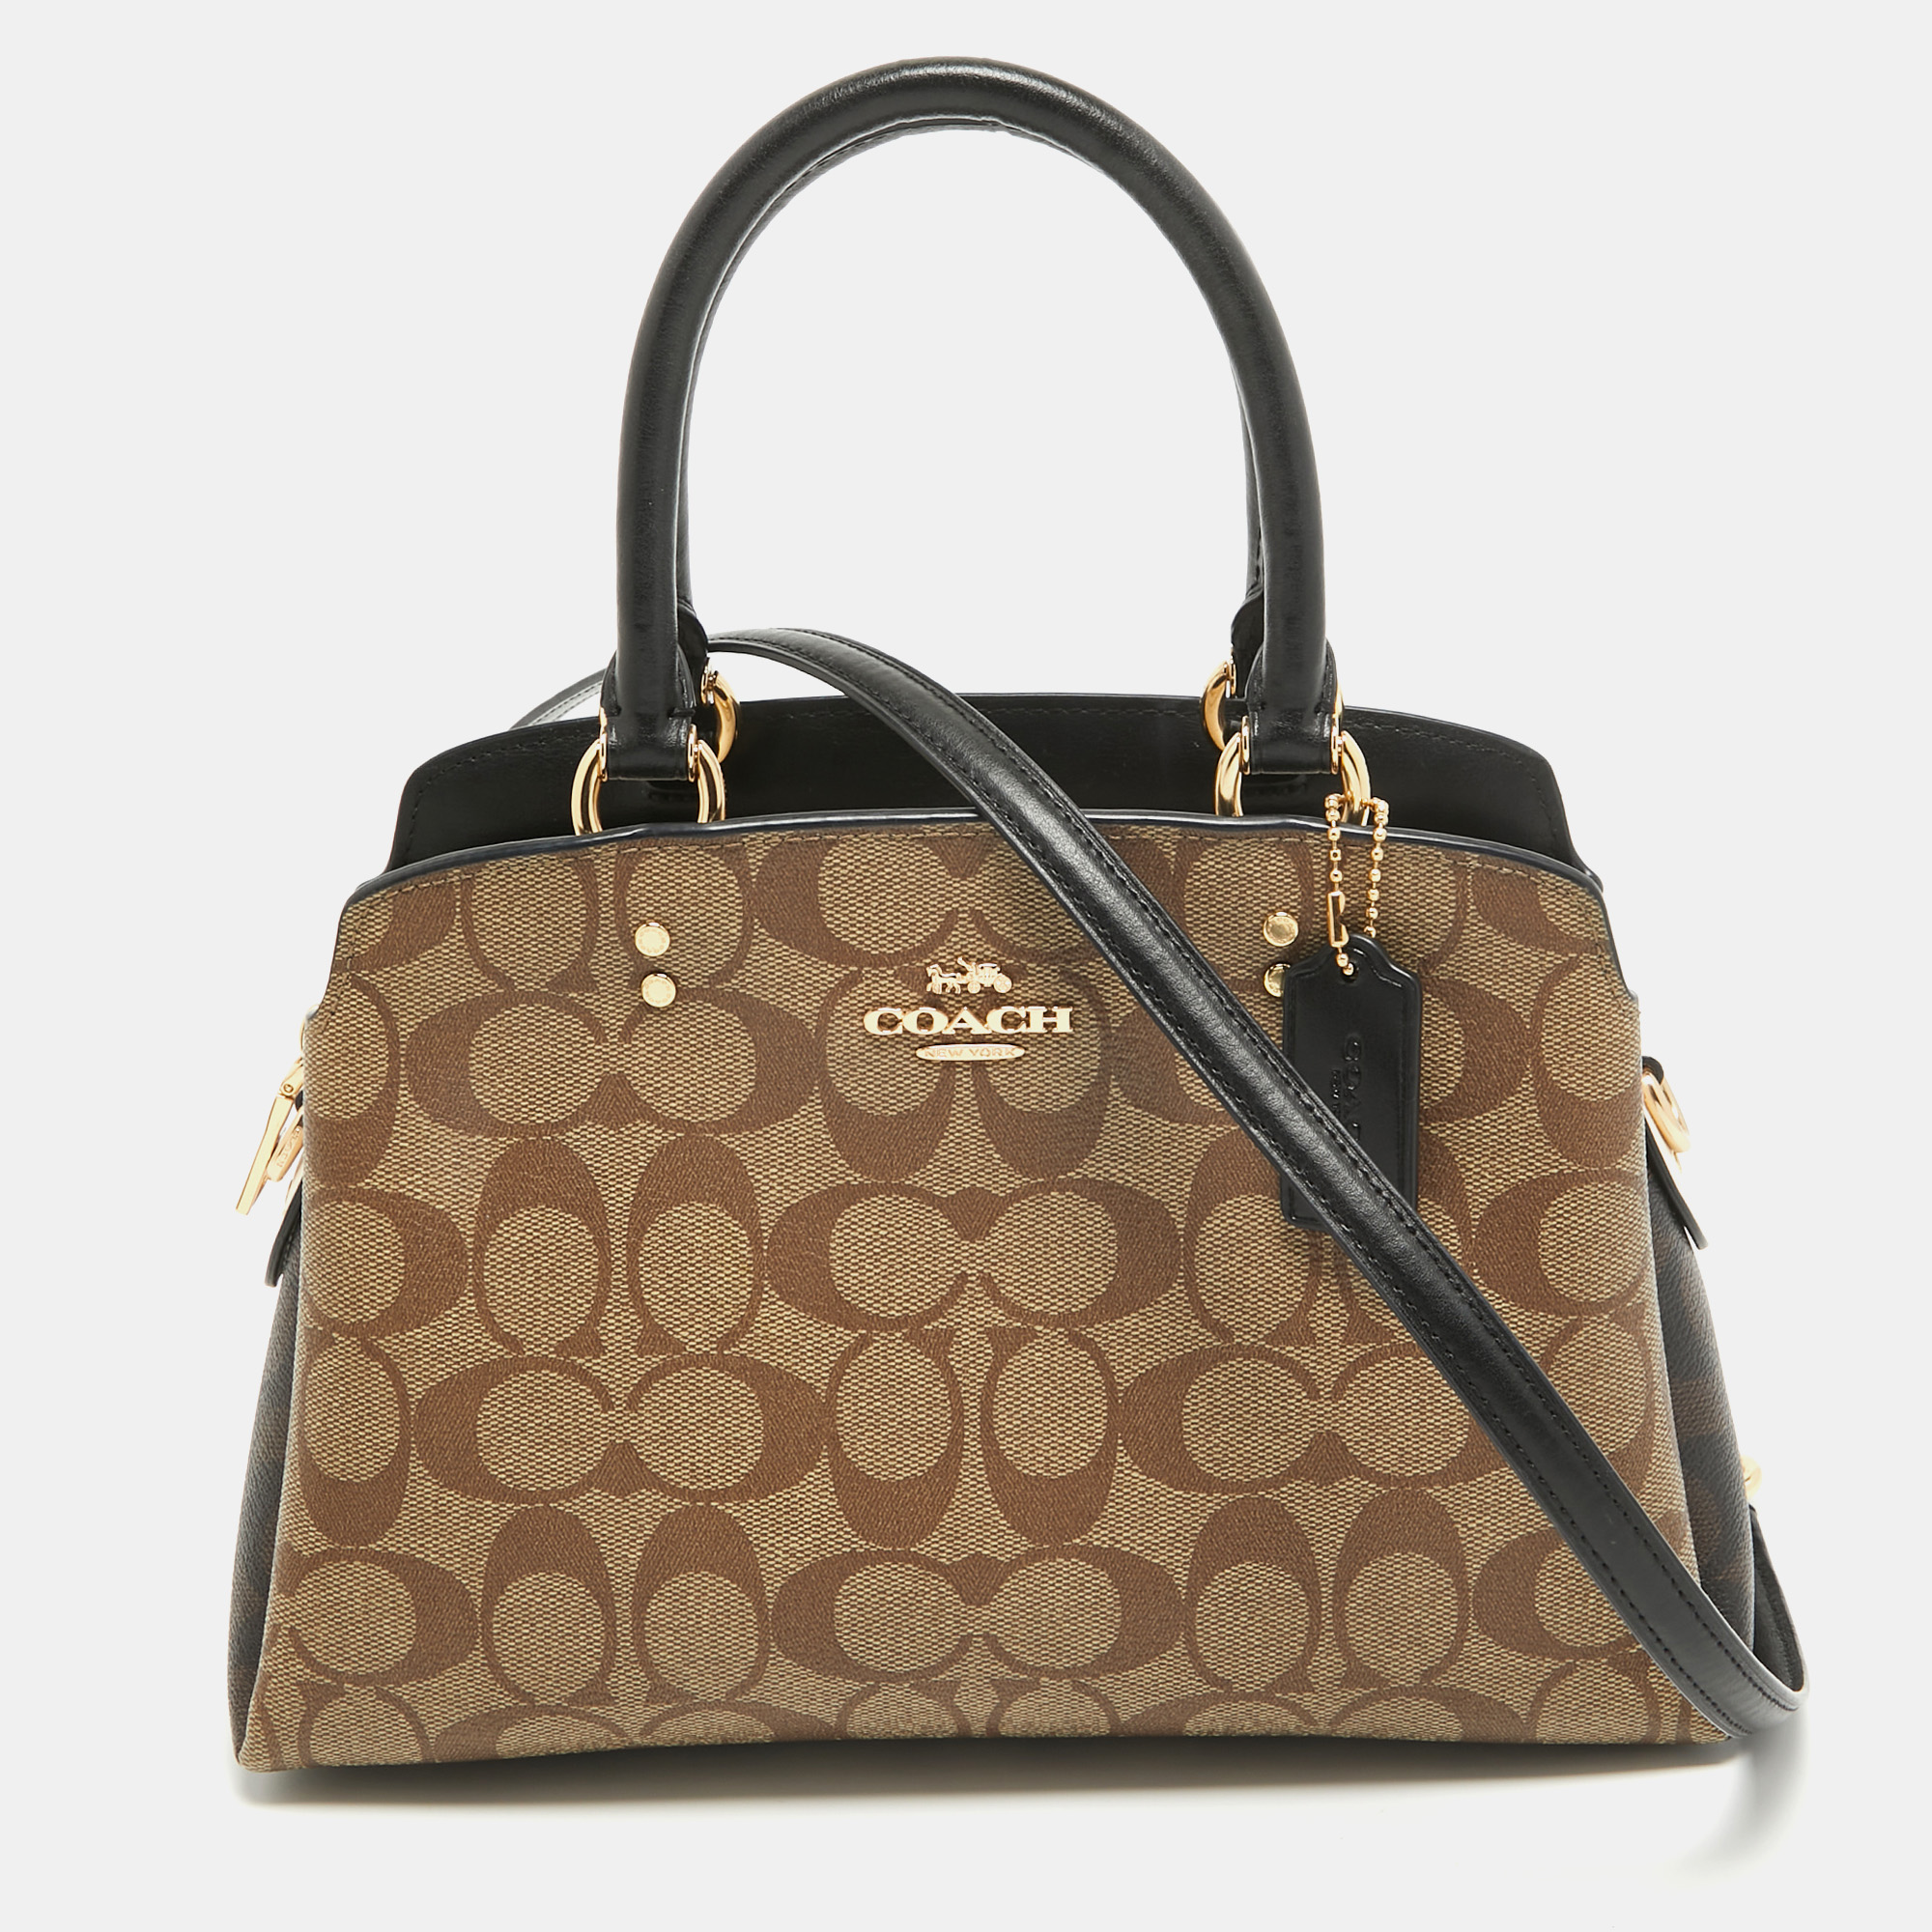 

Coach Black/Beige Signature Coated Canvas and Leather Lillie Satchel